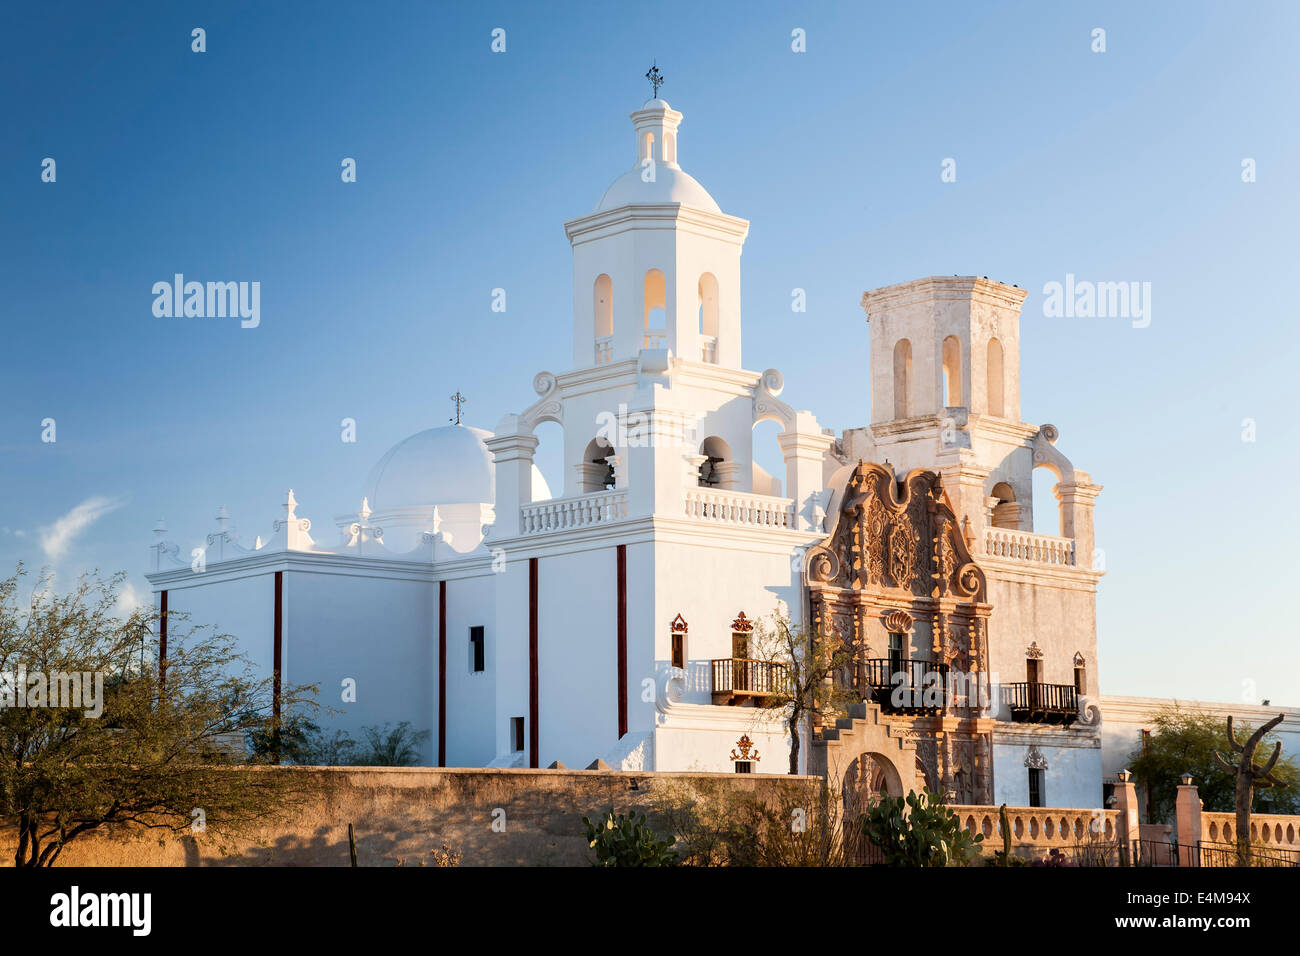 San Xavier del Bac Mission (founded 1700, current structure 1797), Tucson, Arizona USA Stock Photo